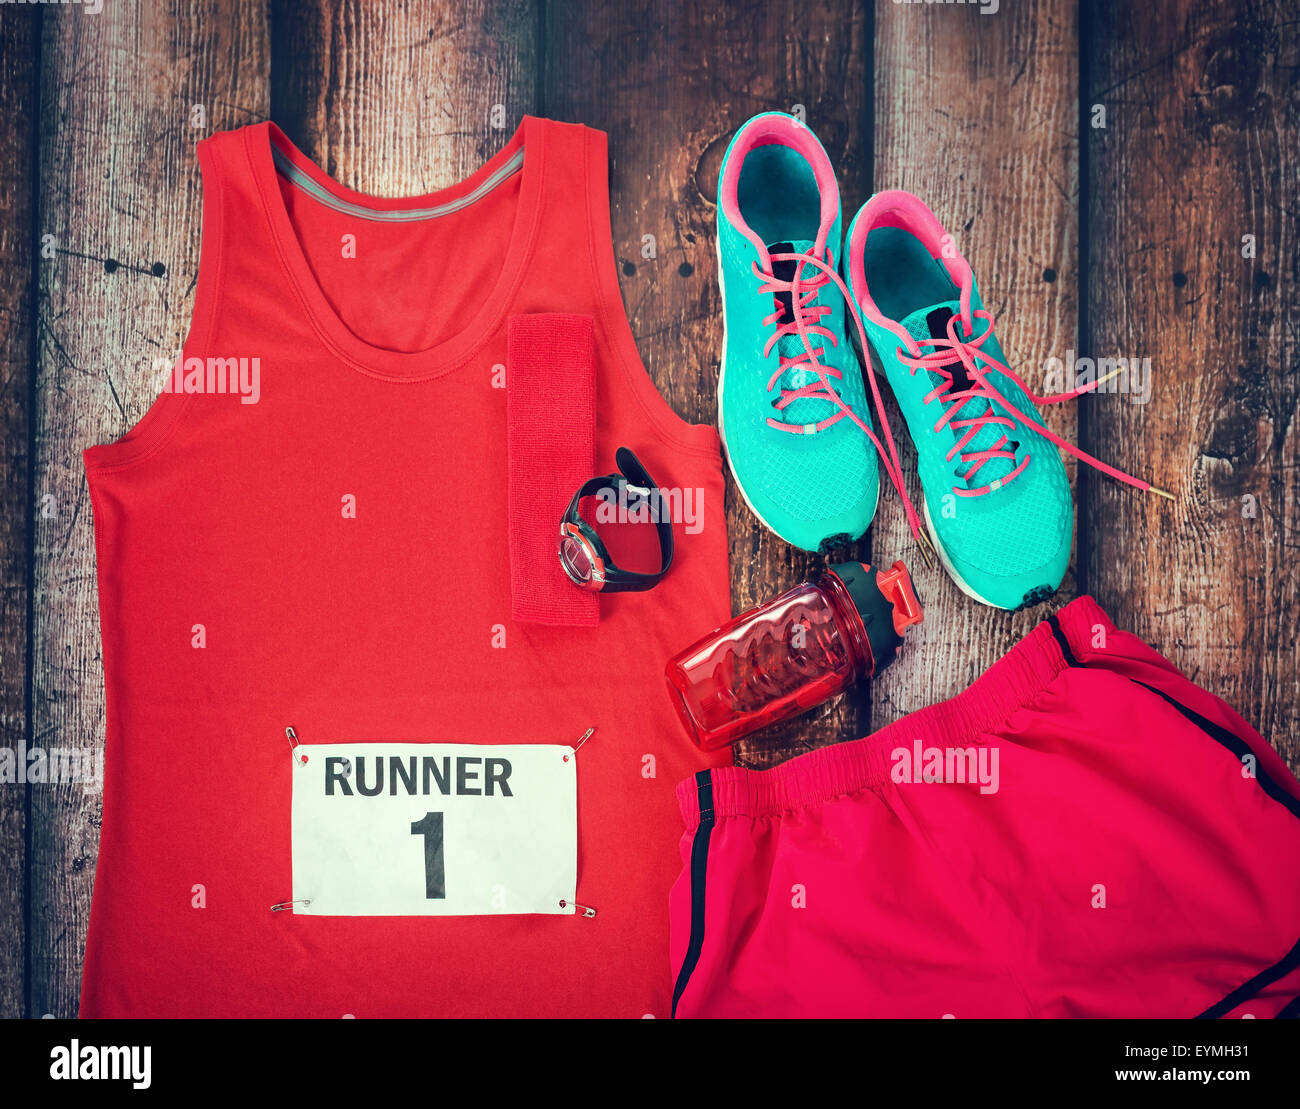 Running gear laid out ready for a race day, rustic wooden background Stock Photo